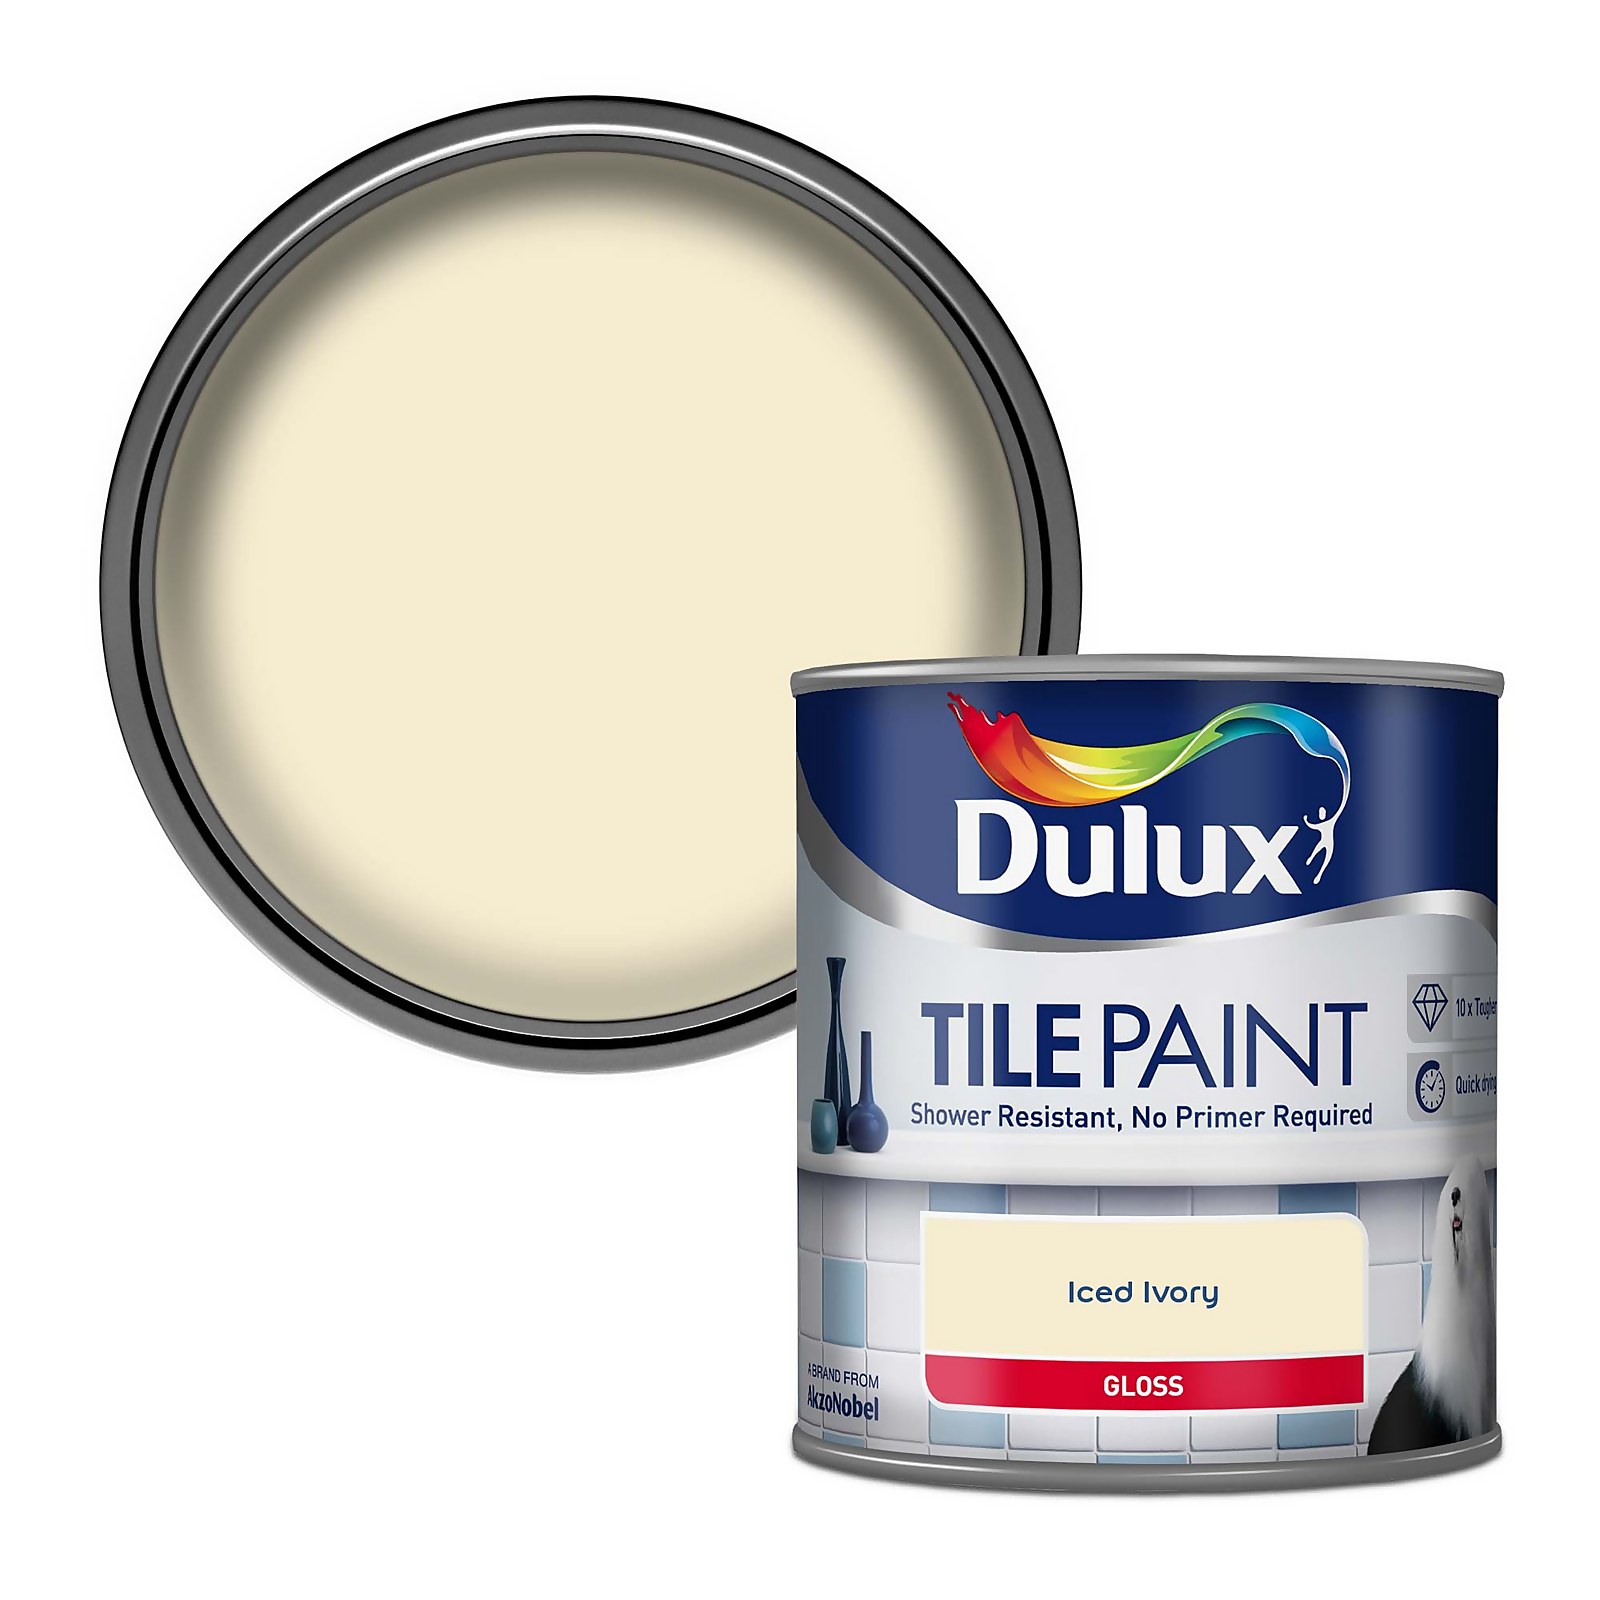 Photo of Dulux Iced Ivory - Tile Paint - 600ml